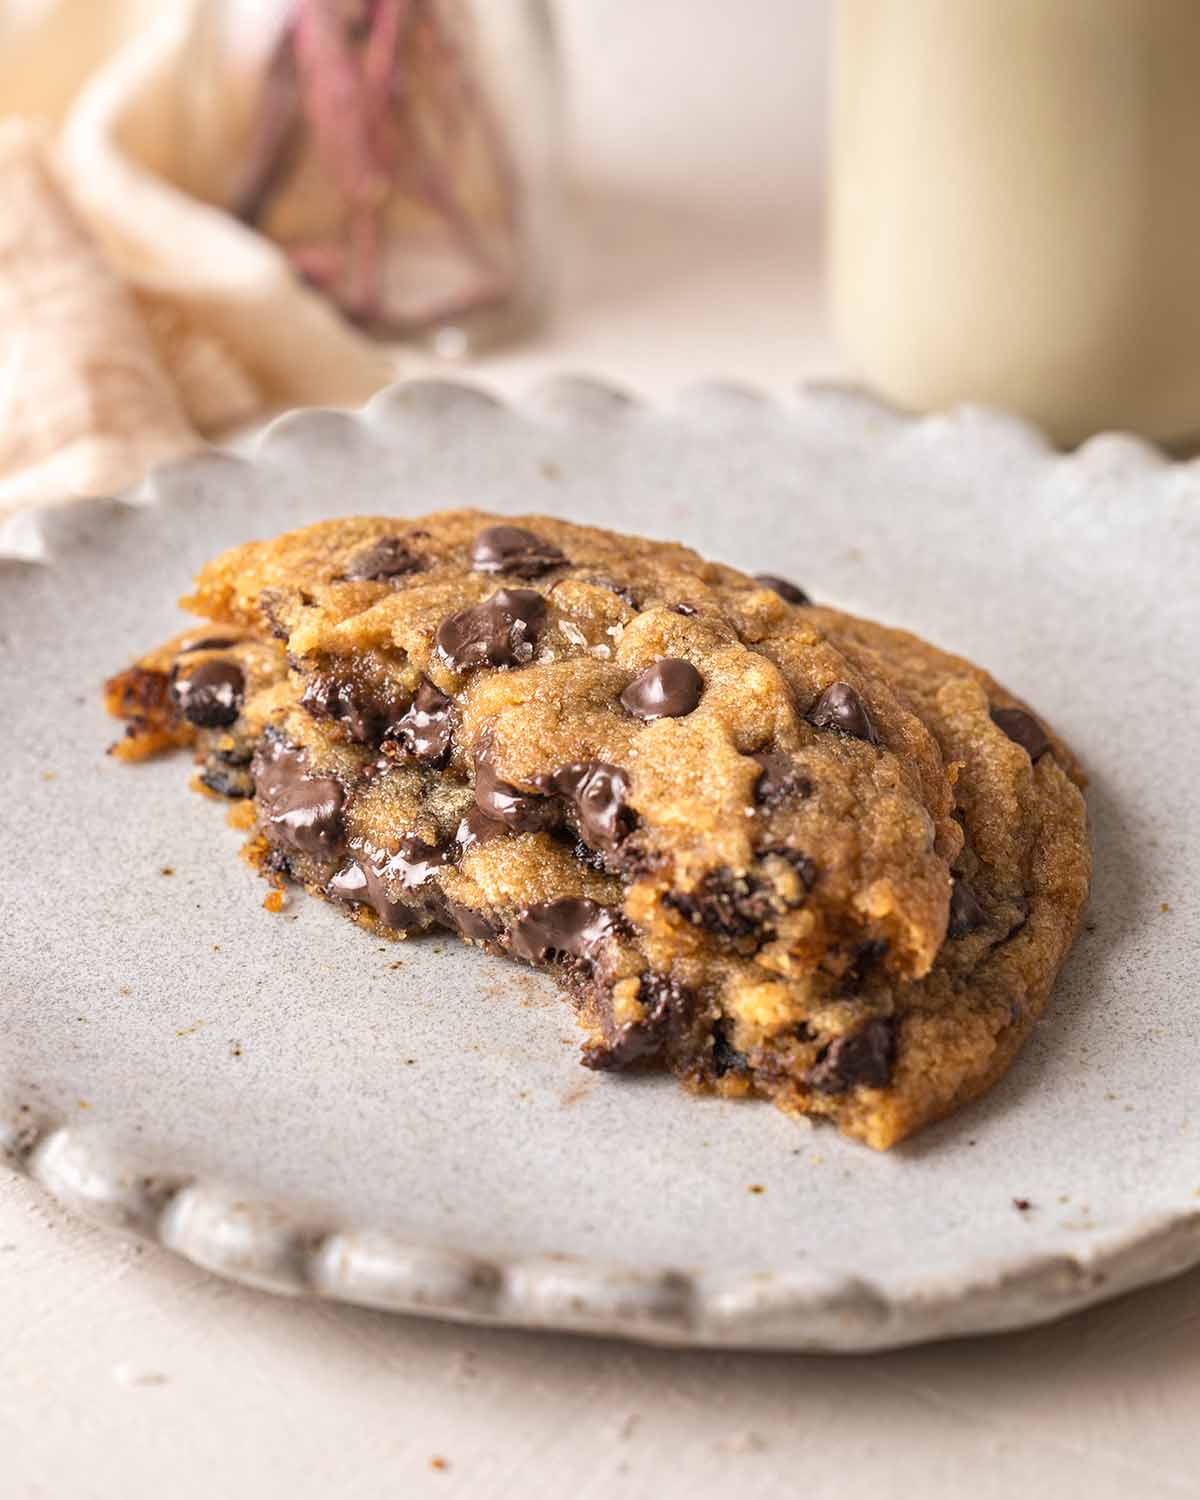 Large cookie split in half sitting on top of each other showing gooey interior and melty chocolate chips.